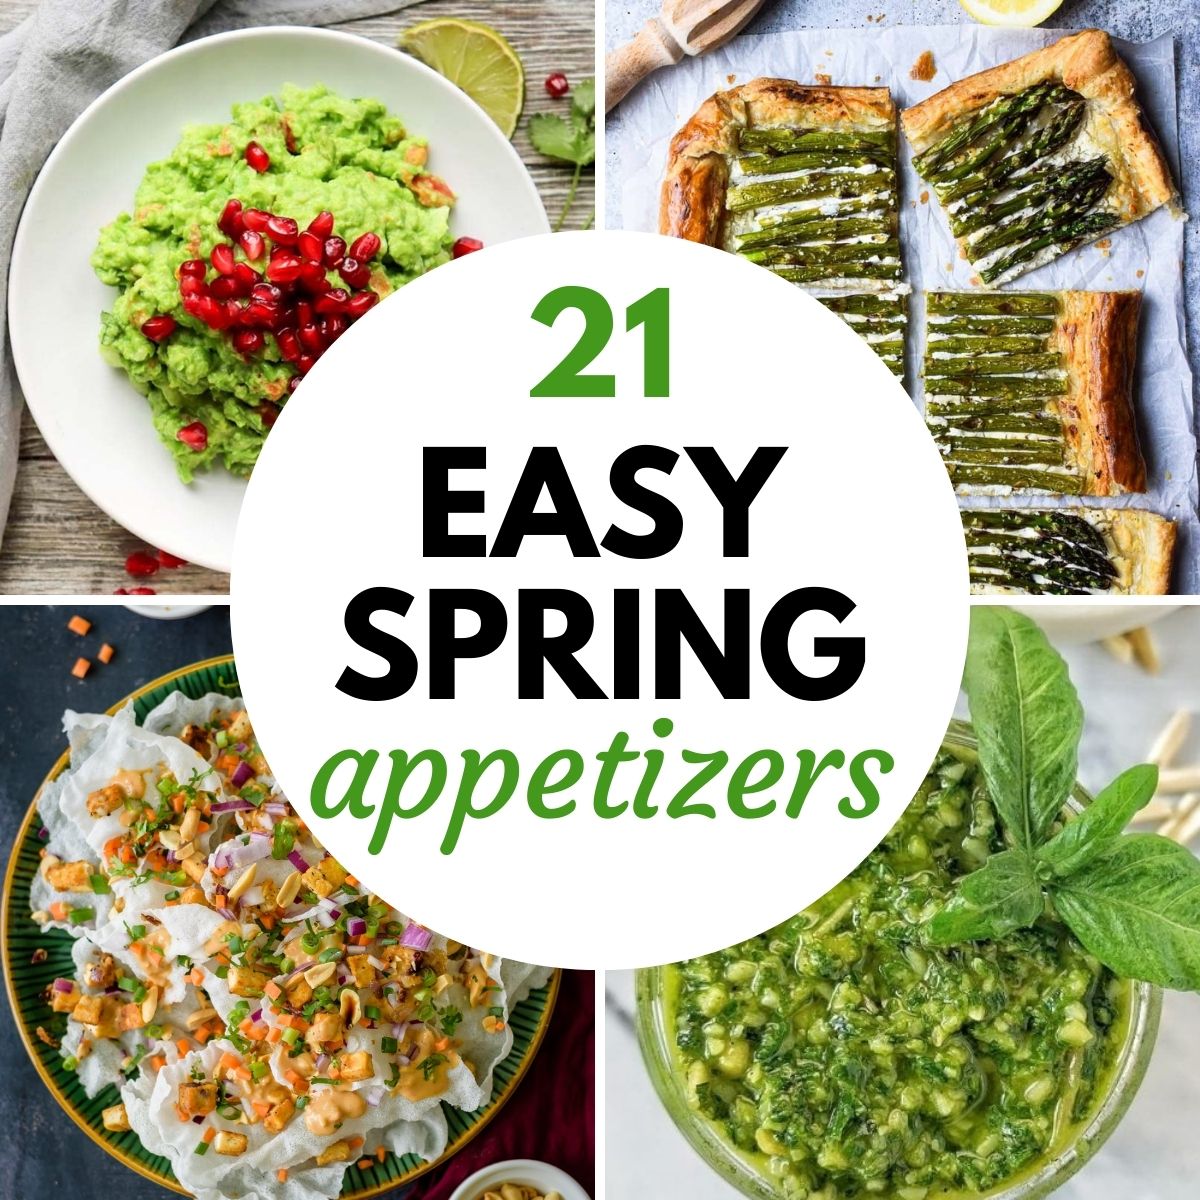 Image graphic with text that reads "21 Easy Spring Appetizers" and a collage of appetizer recipes for spring.